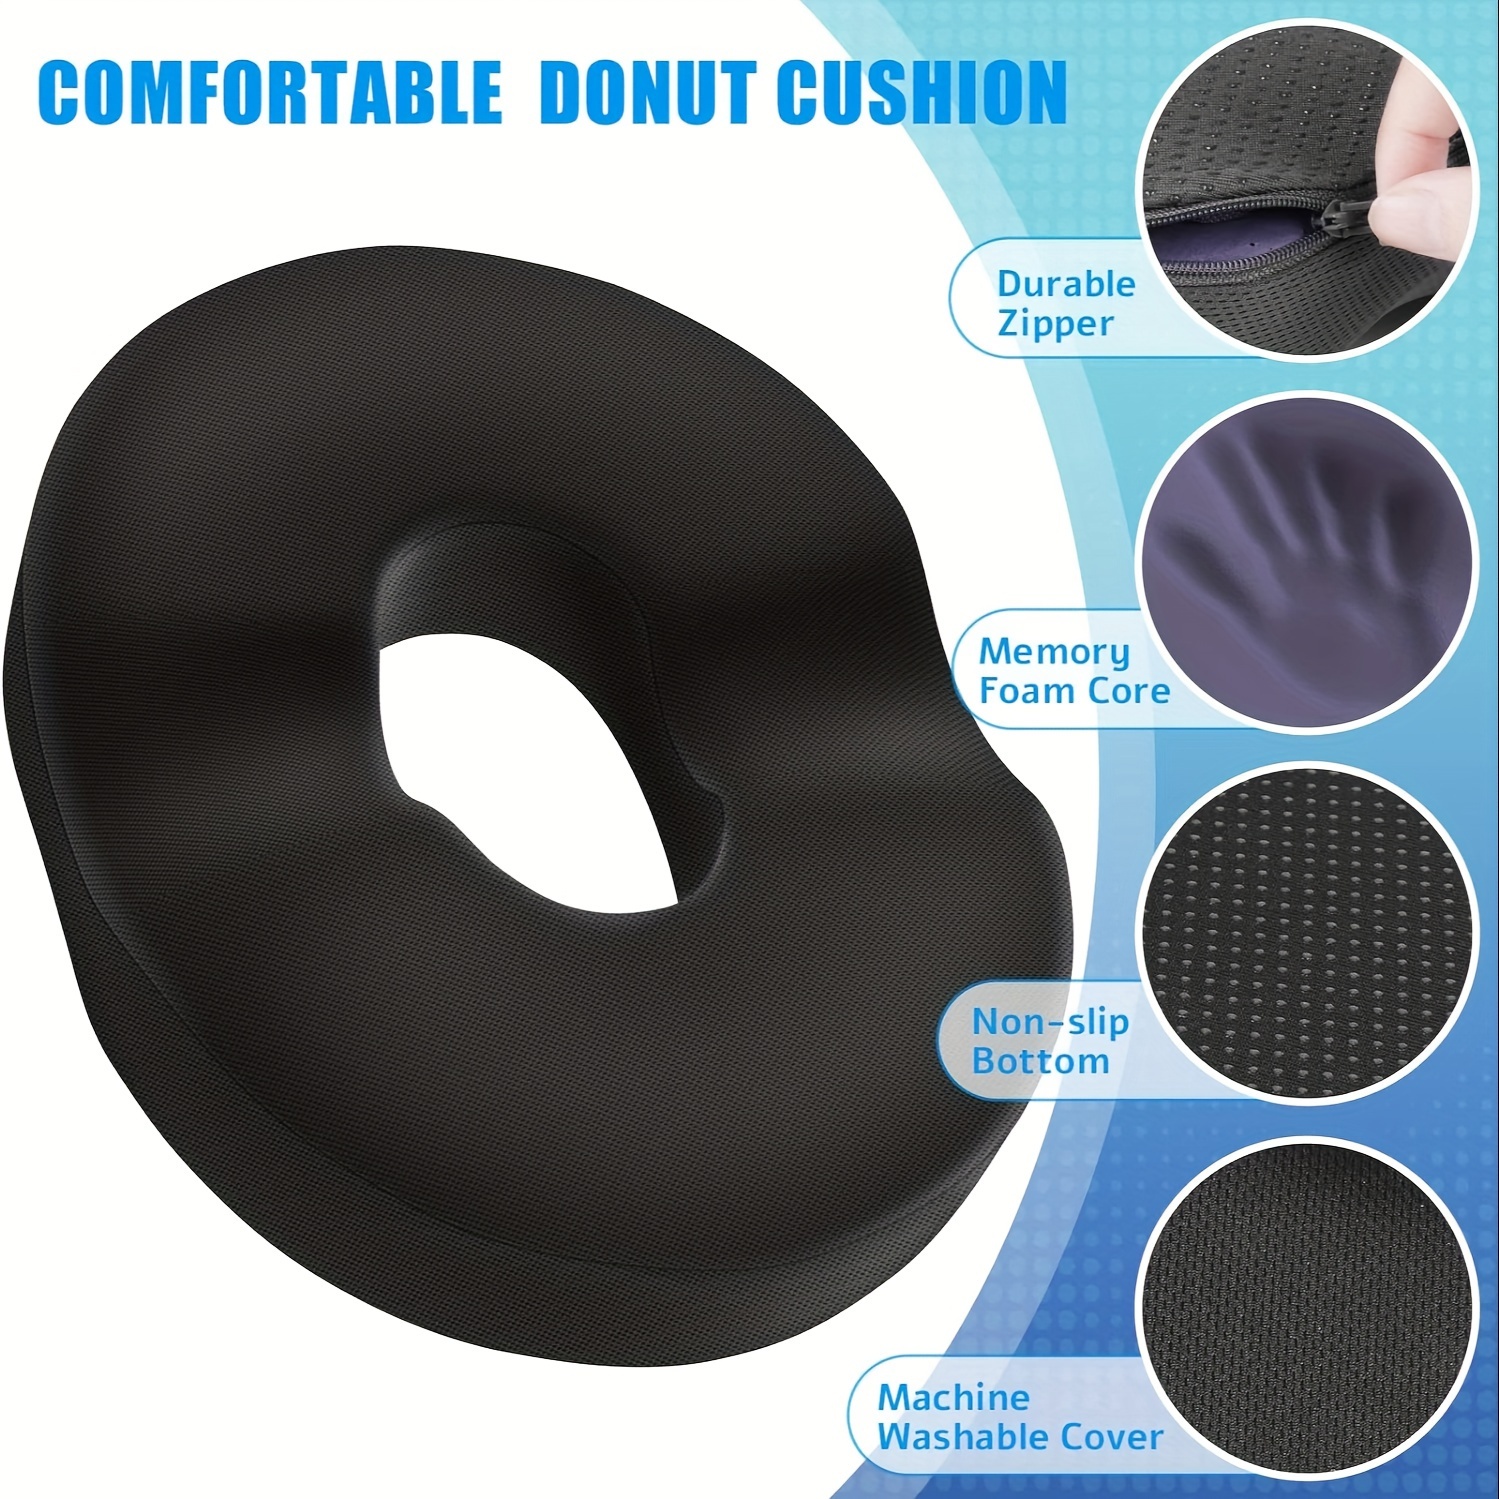 Donut Pillow for Tailbone Pain Relief Cushion for Sitting for Postpartum  Pregnancy, Butt Seat Cushion, Back, Coccyx, Sciatica